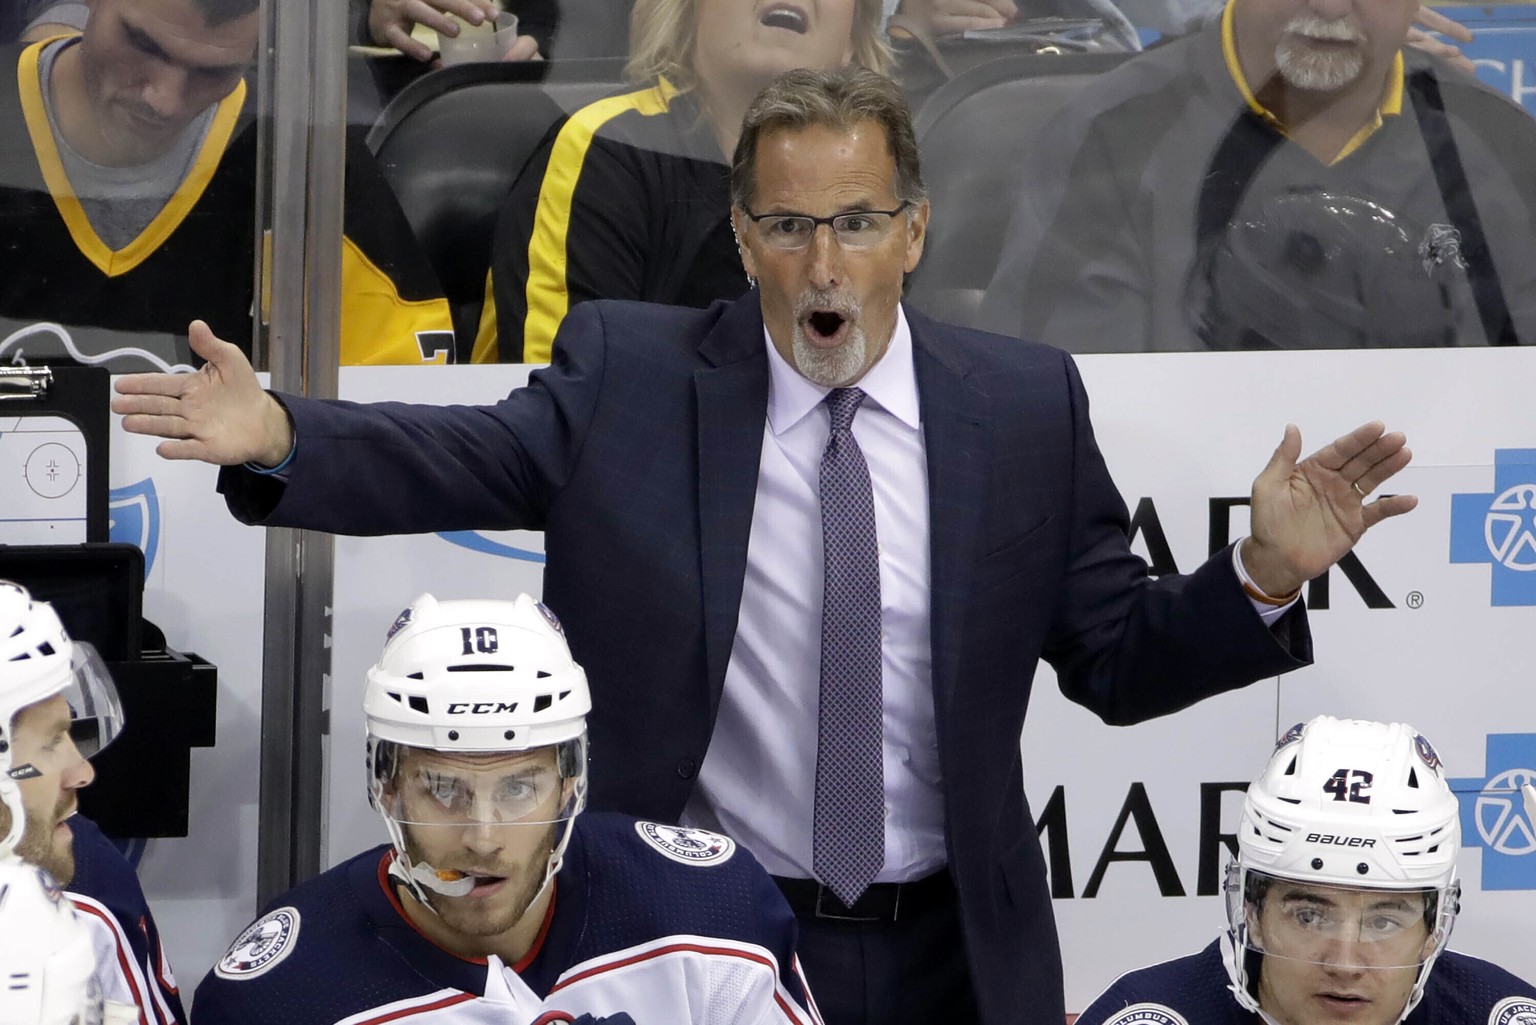 FILE - In this Oct. 5, 2019, file photo, Columbus Blue Jackets head coach John Tortorella objects to a call during the first period of an NHL hockey game against the Pittsburgh Penguins in Pittsburgh. ...